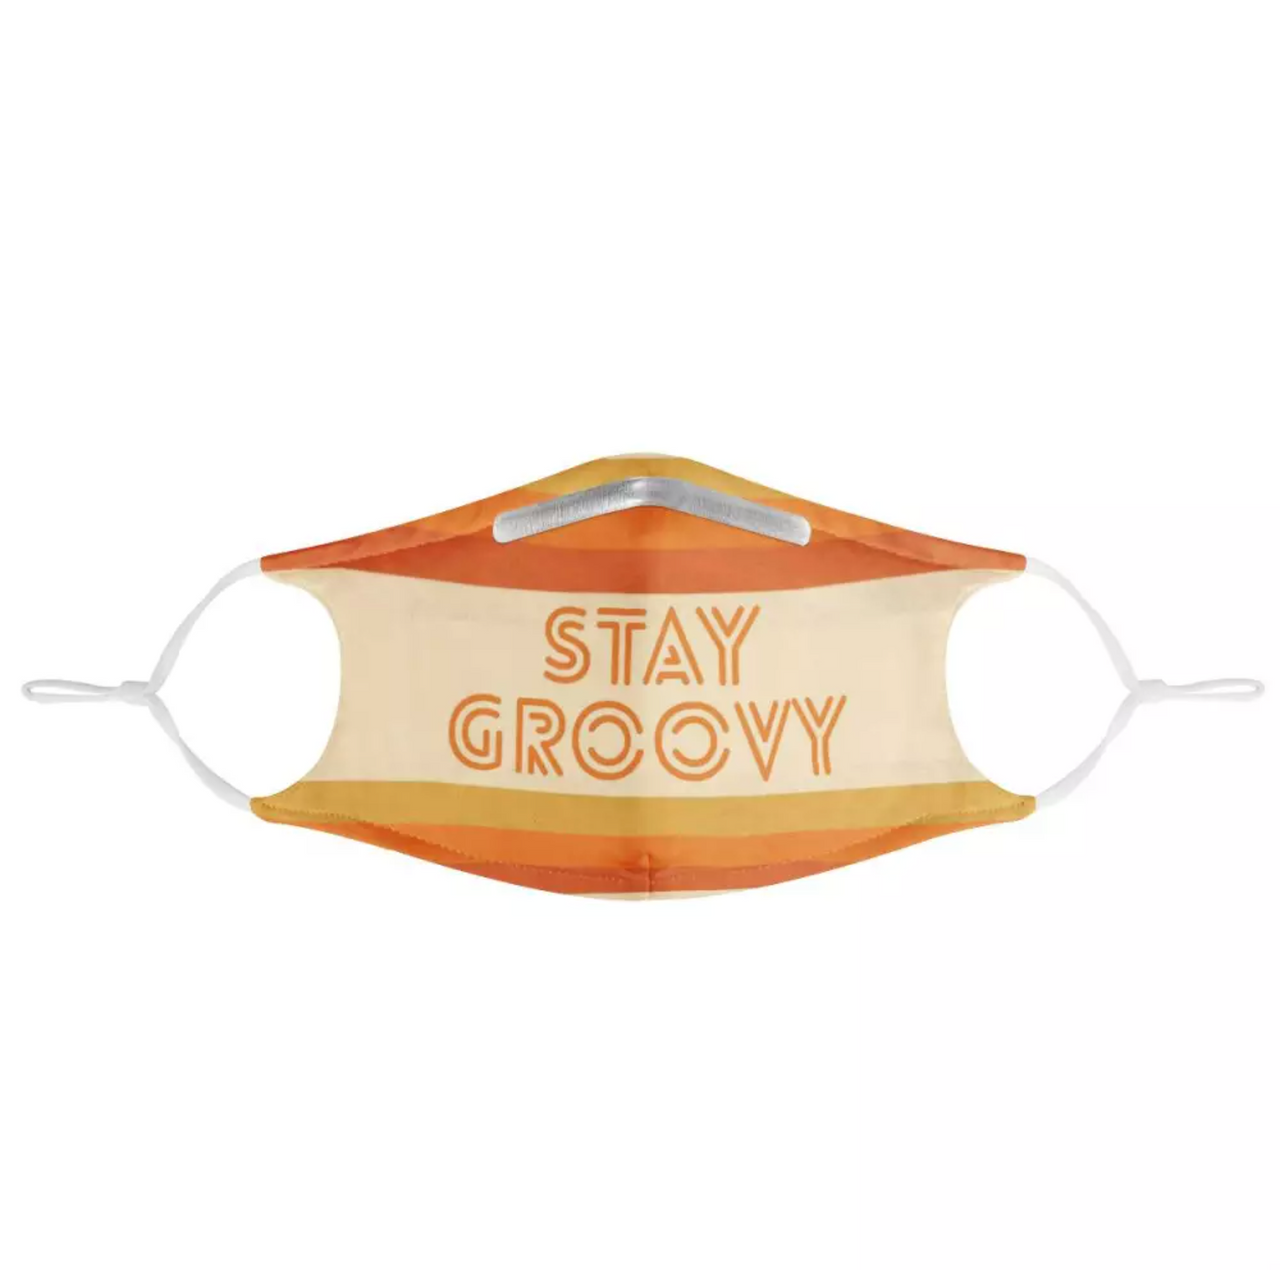 STAY GROOVY - MASK WITH (4) PM 2.5 CARBON FILTERS